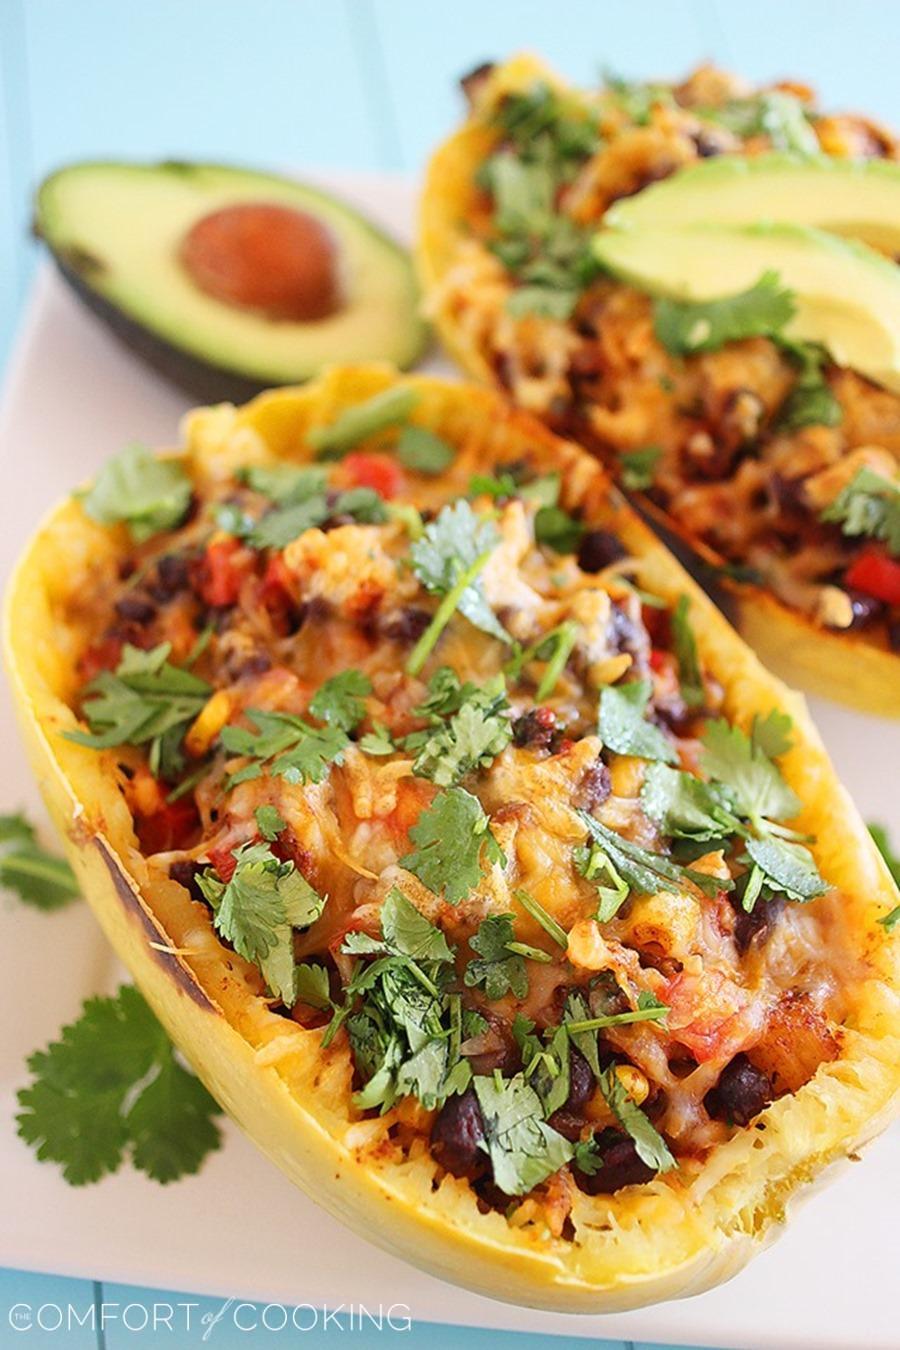 Southwestern Stuffed Spaghetti Squash – This hearty, healthy spaghetti squash stuffed with zesty Mexican flavors is perfect for putting a twist on your typical weeknight meals! | thecomfortofcooking.com